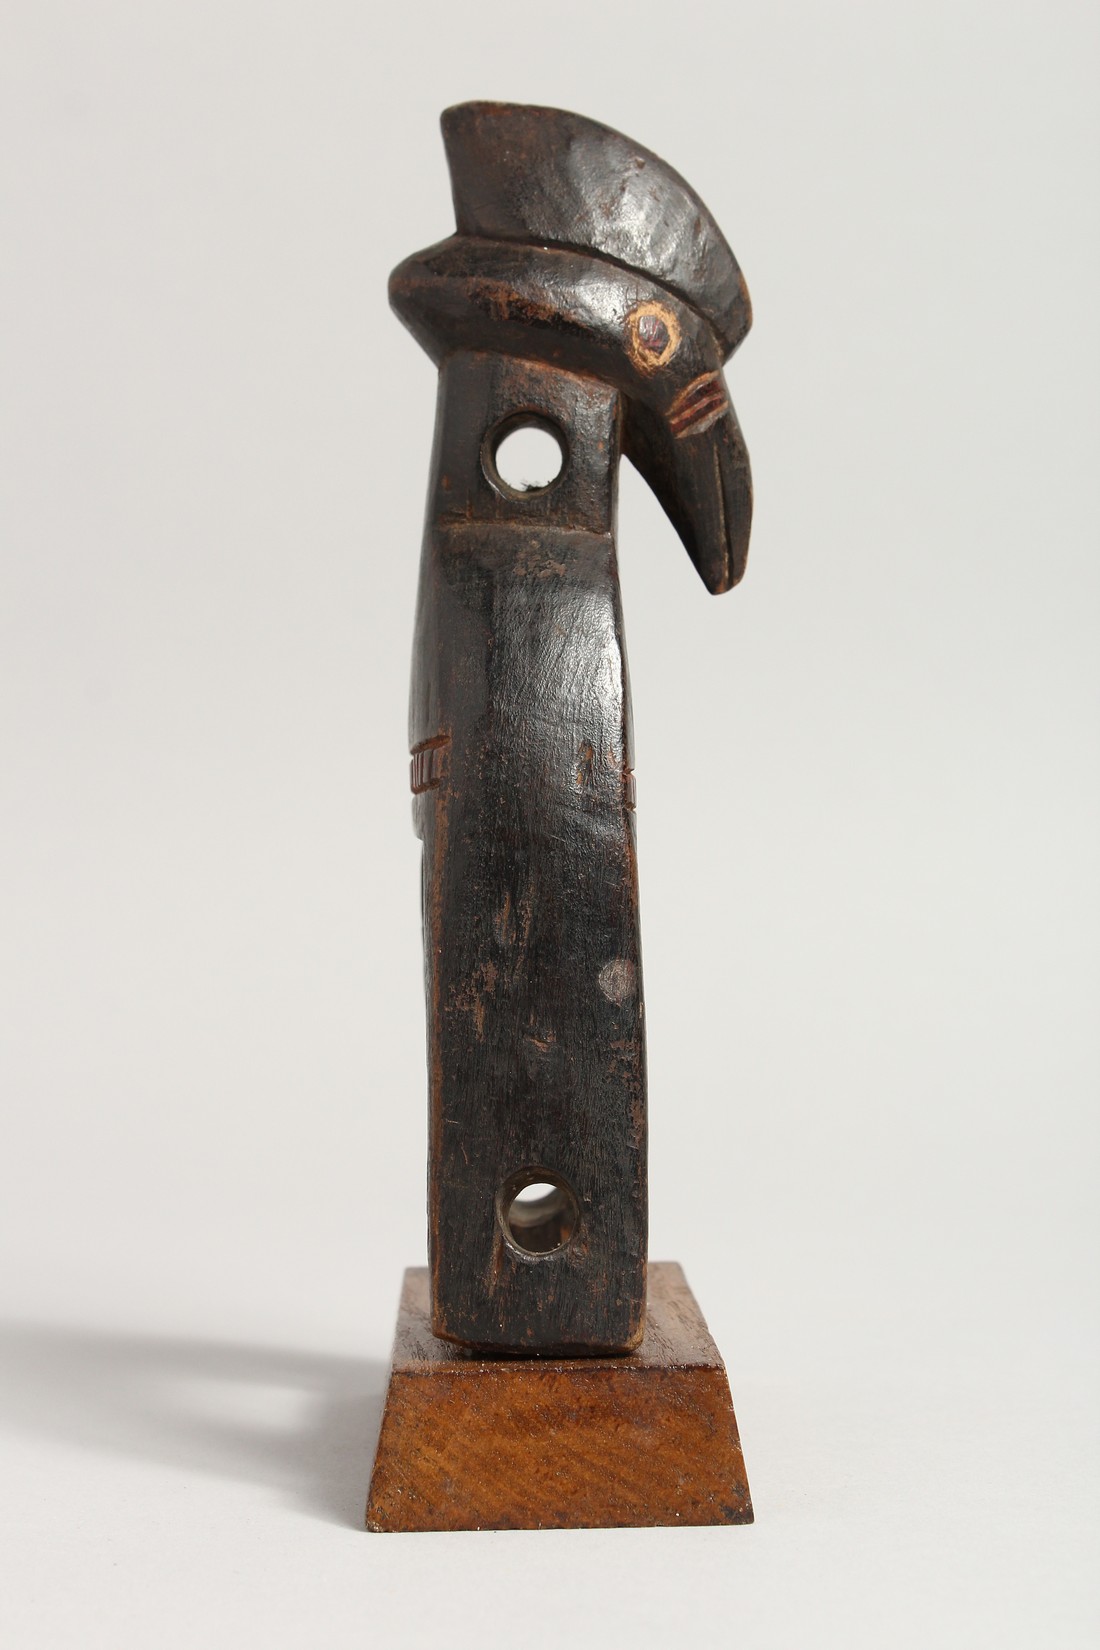 A TRIBAL WOODEN PULLEY BIRD'S HEAD. 7.5ins. - Image 2 of 4